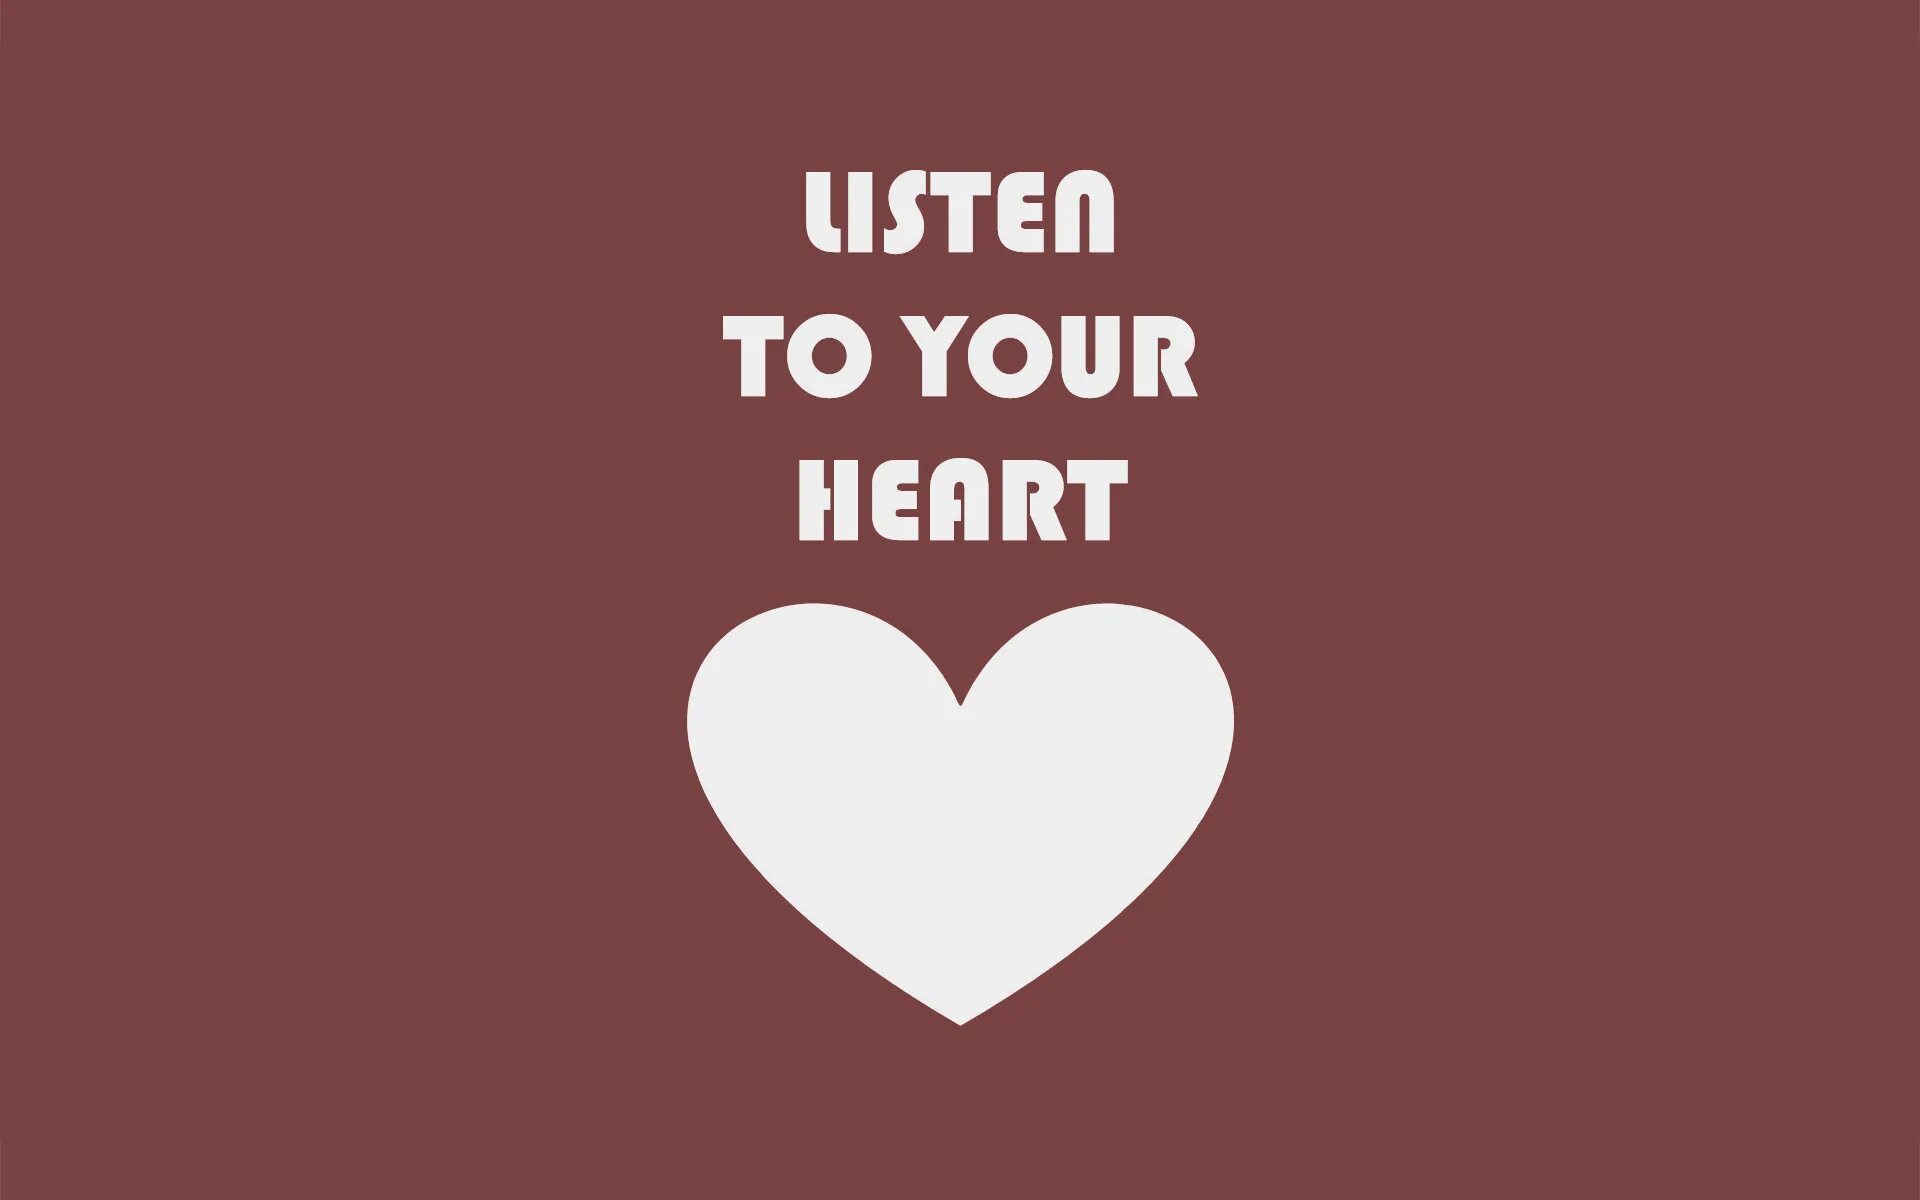 Words of your heart. Listen to your Heart. Your Heart. Yours hers. Listen your Heart.